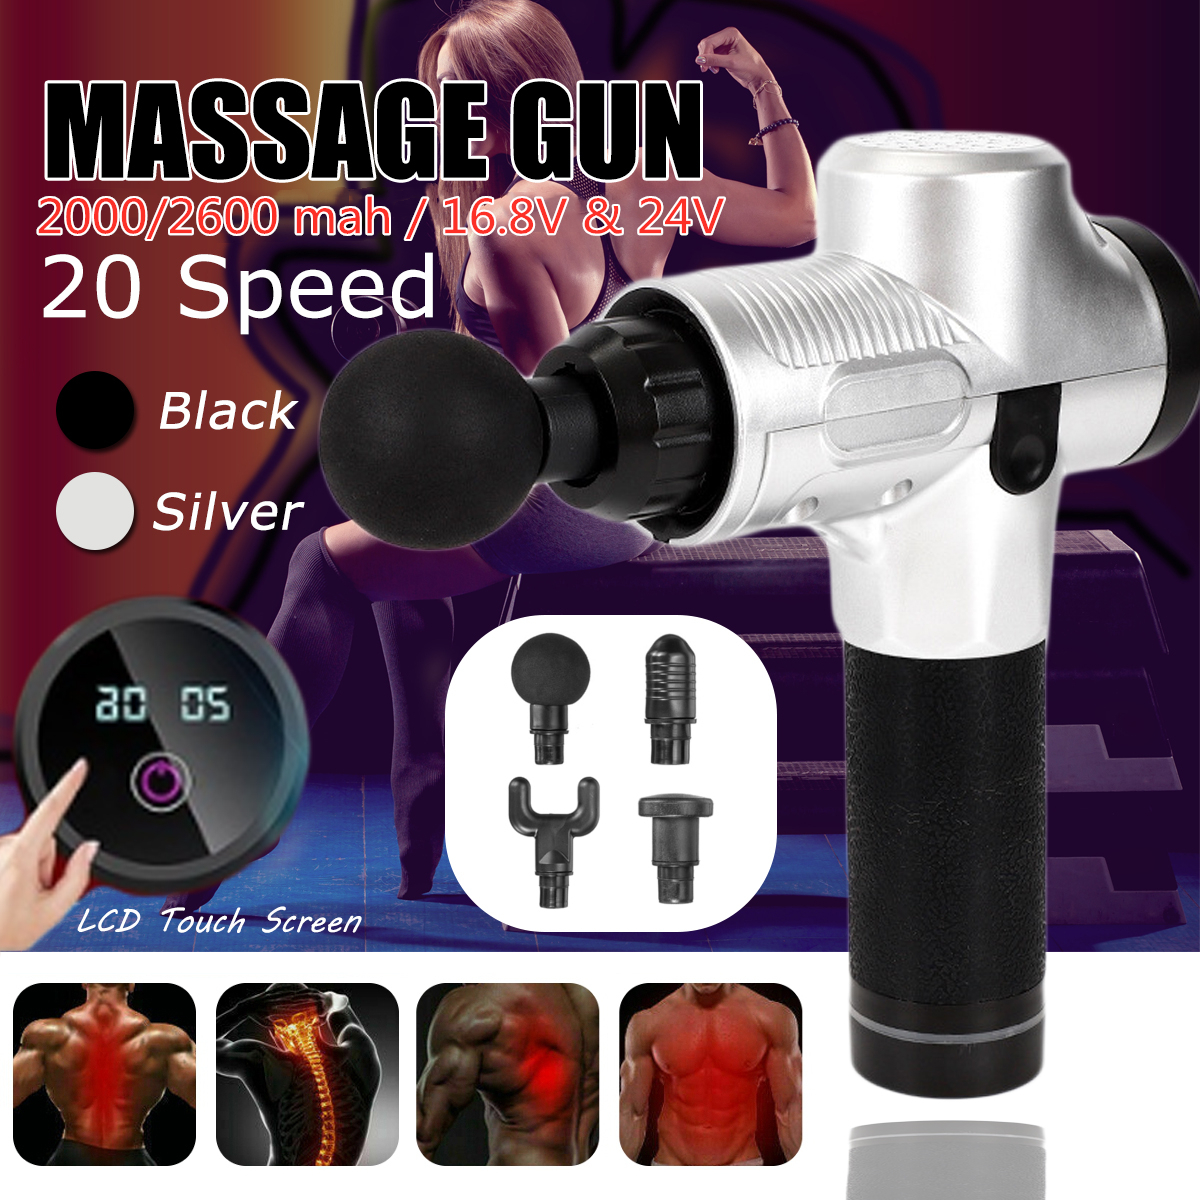 168V-2000mAh-Touch-Screen-20-Speed-Fascia-Muscle-Relaxation-Massager-Display-Gym-High-Frequency-Vibr-1581561-1